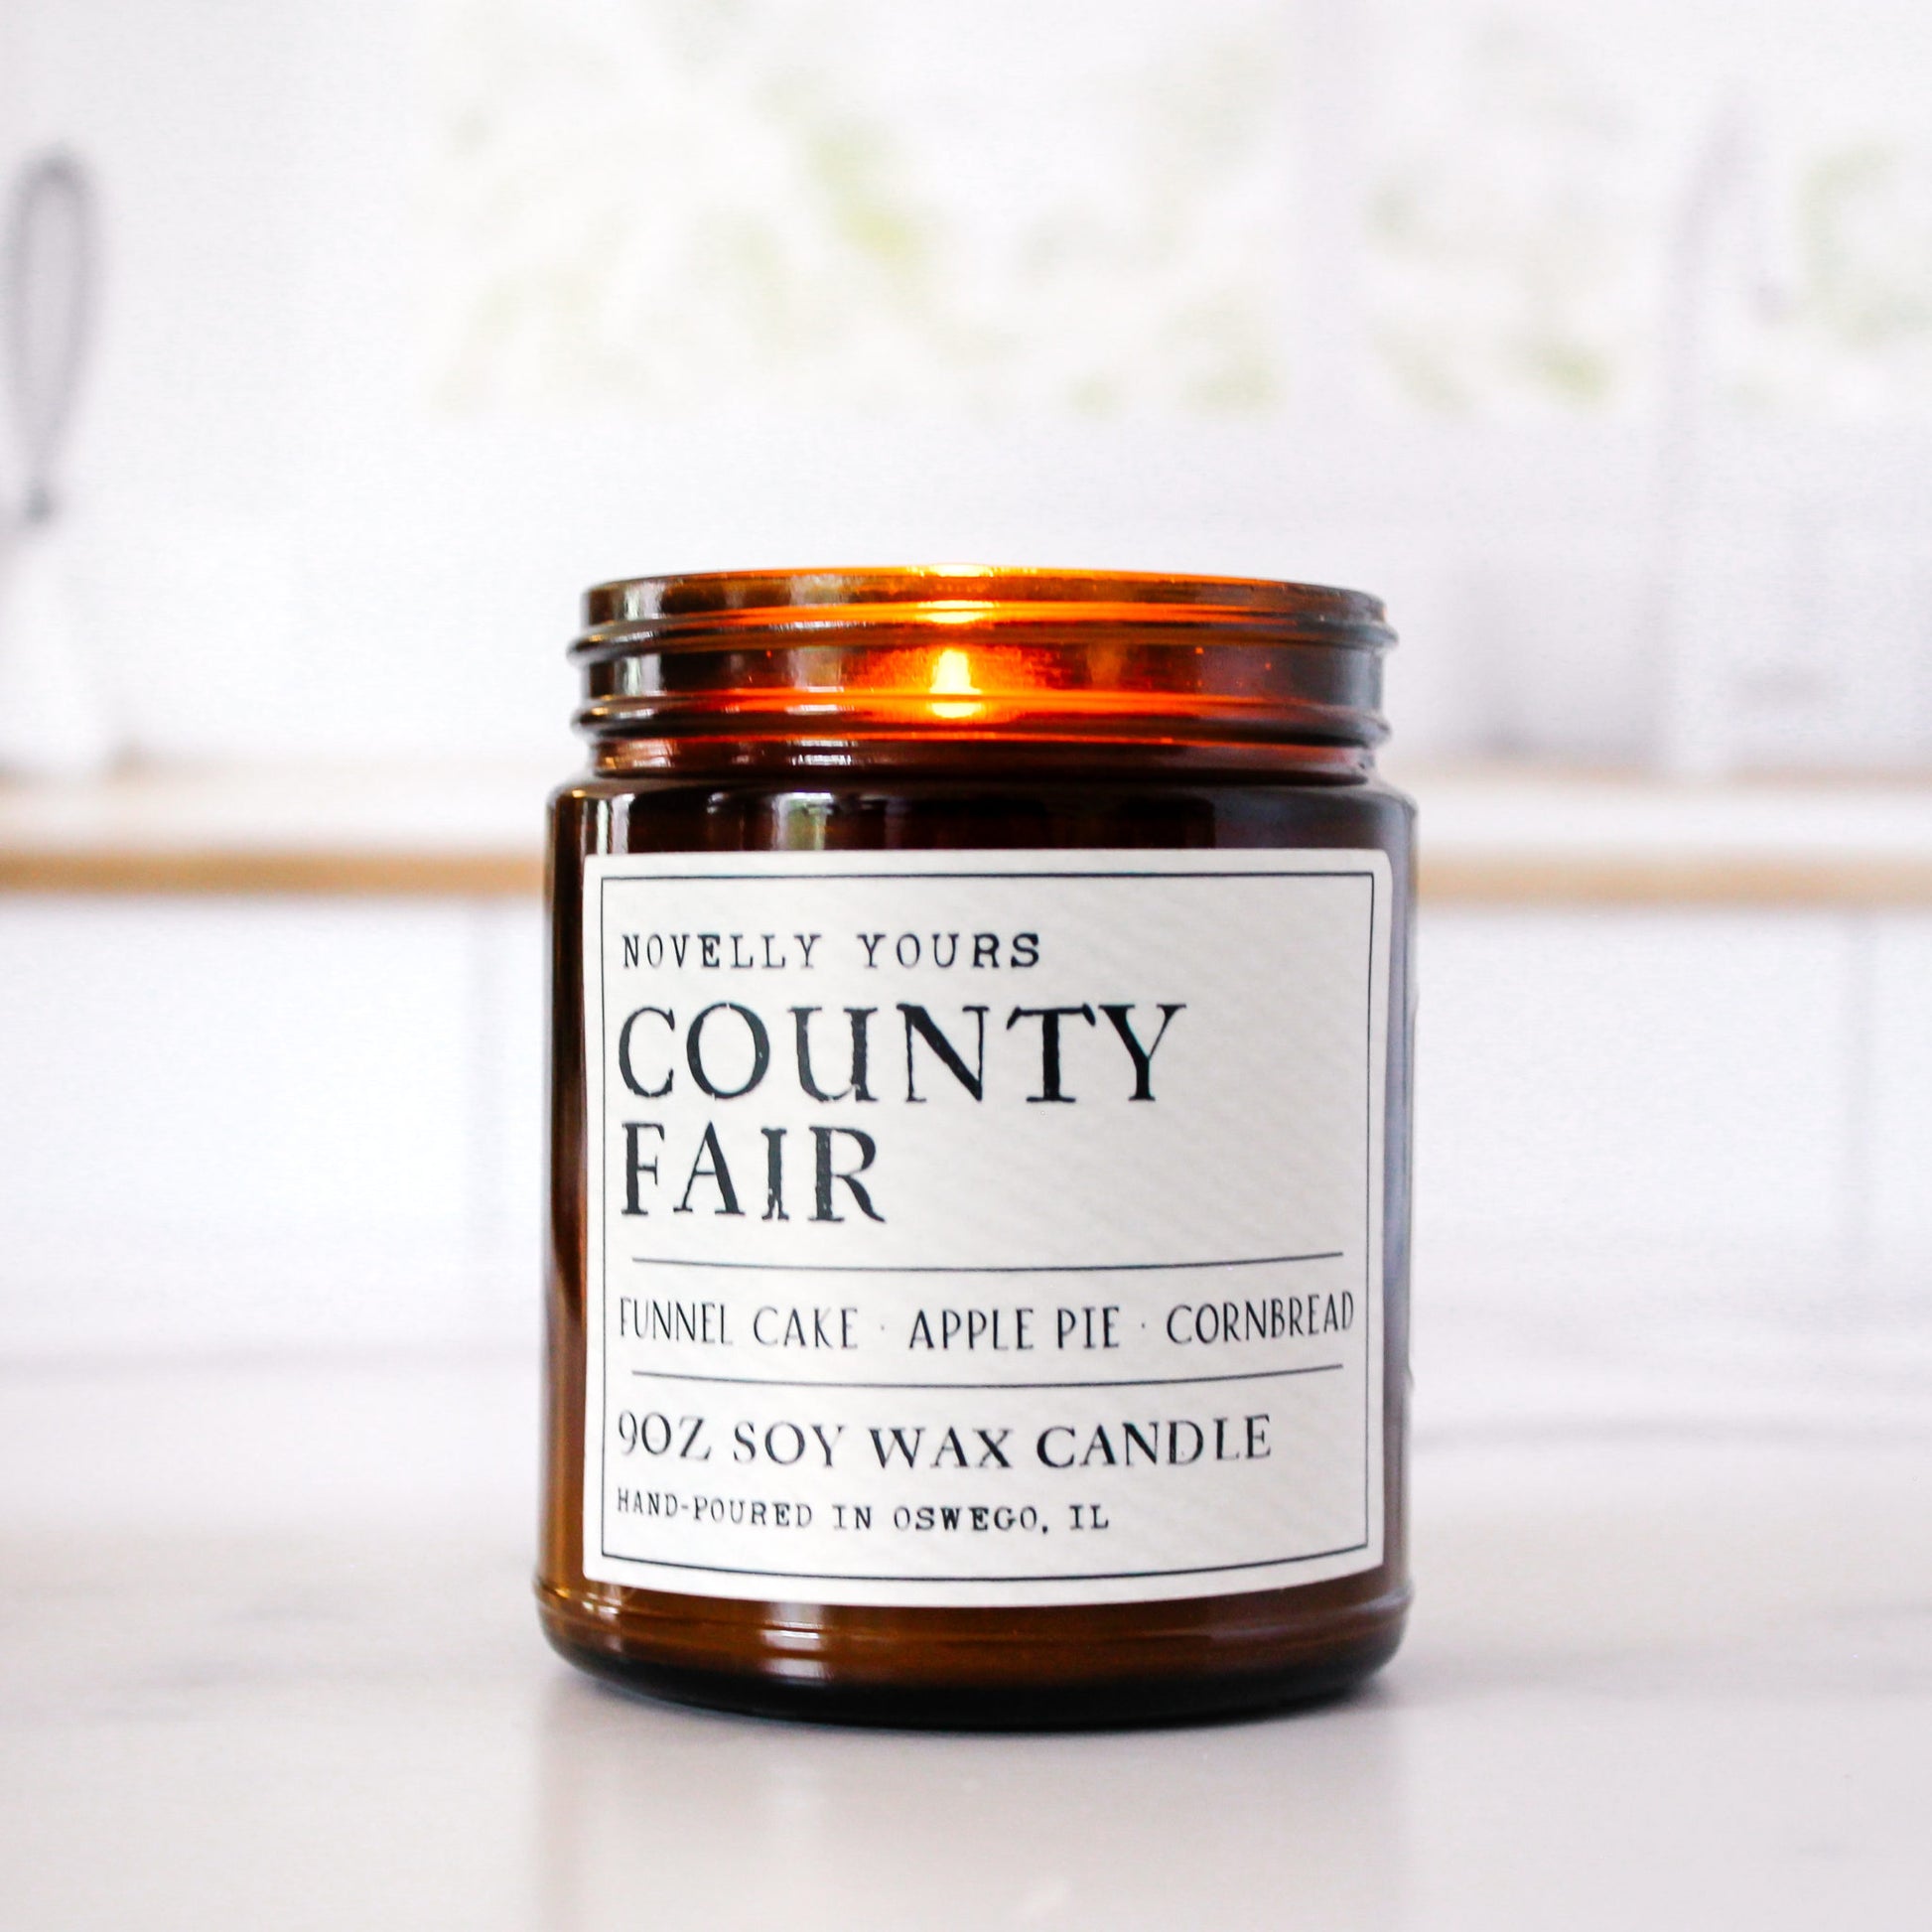 county fair bakery scented soy wax candle in amber jar sits against clean kitchen background